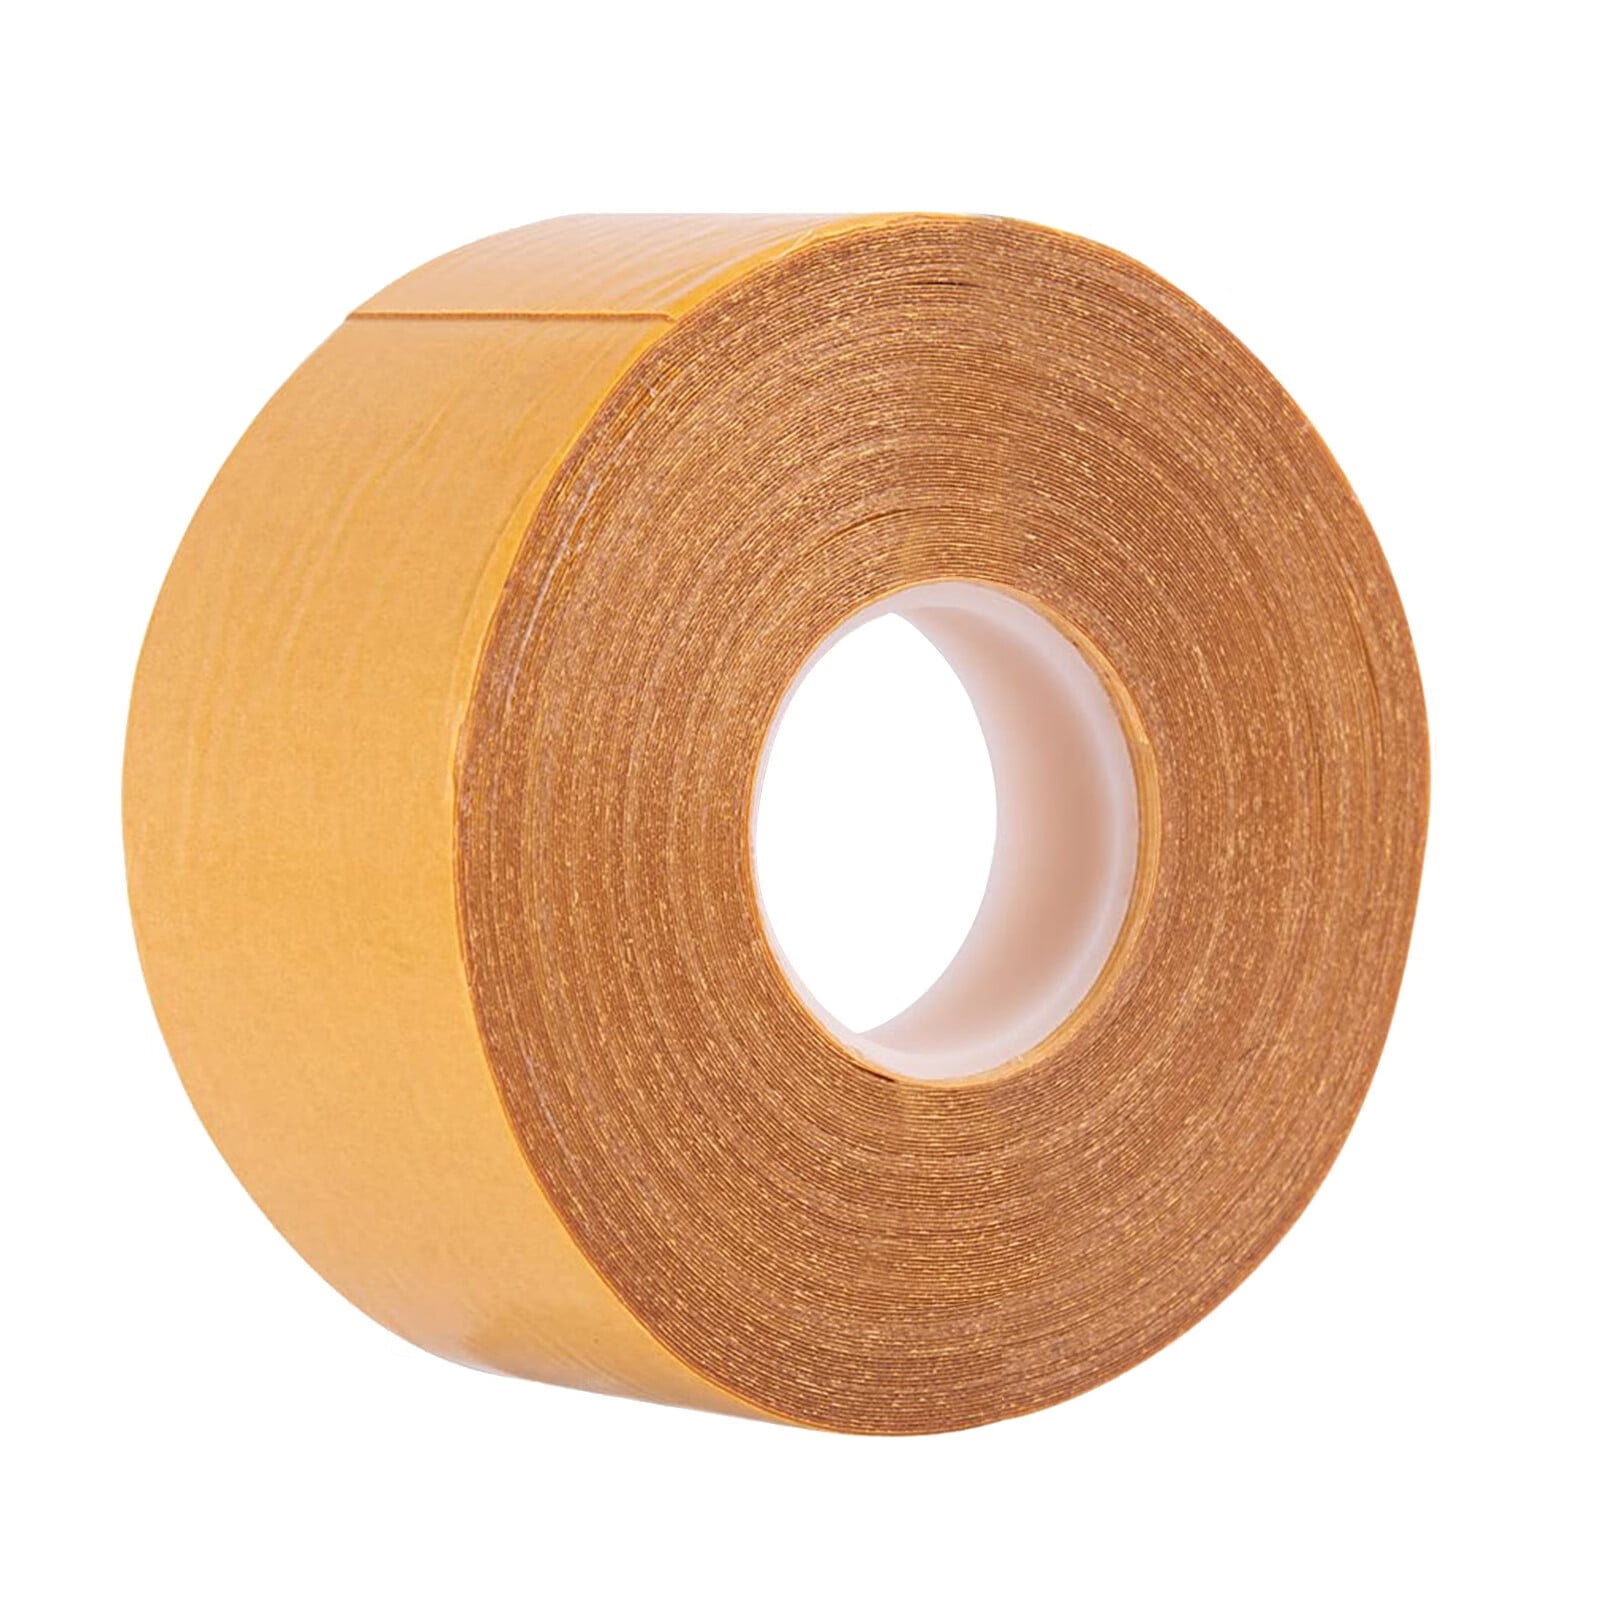 AdTech Crafter's Permanent Double Sided Adhesive Tape, 4 Pack